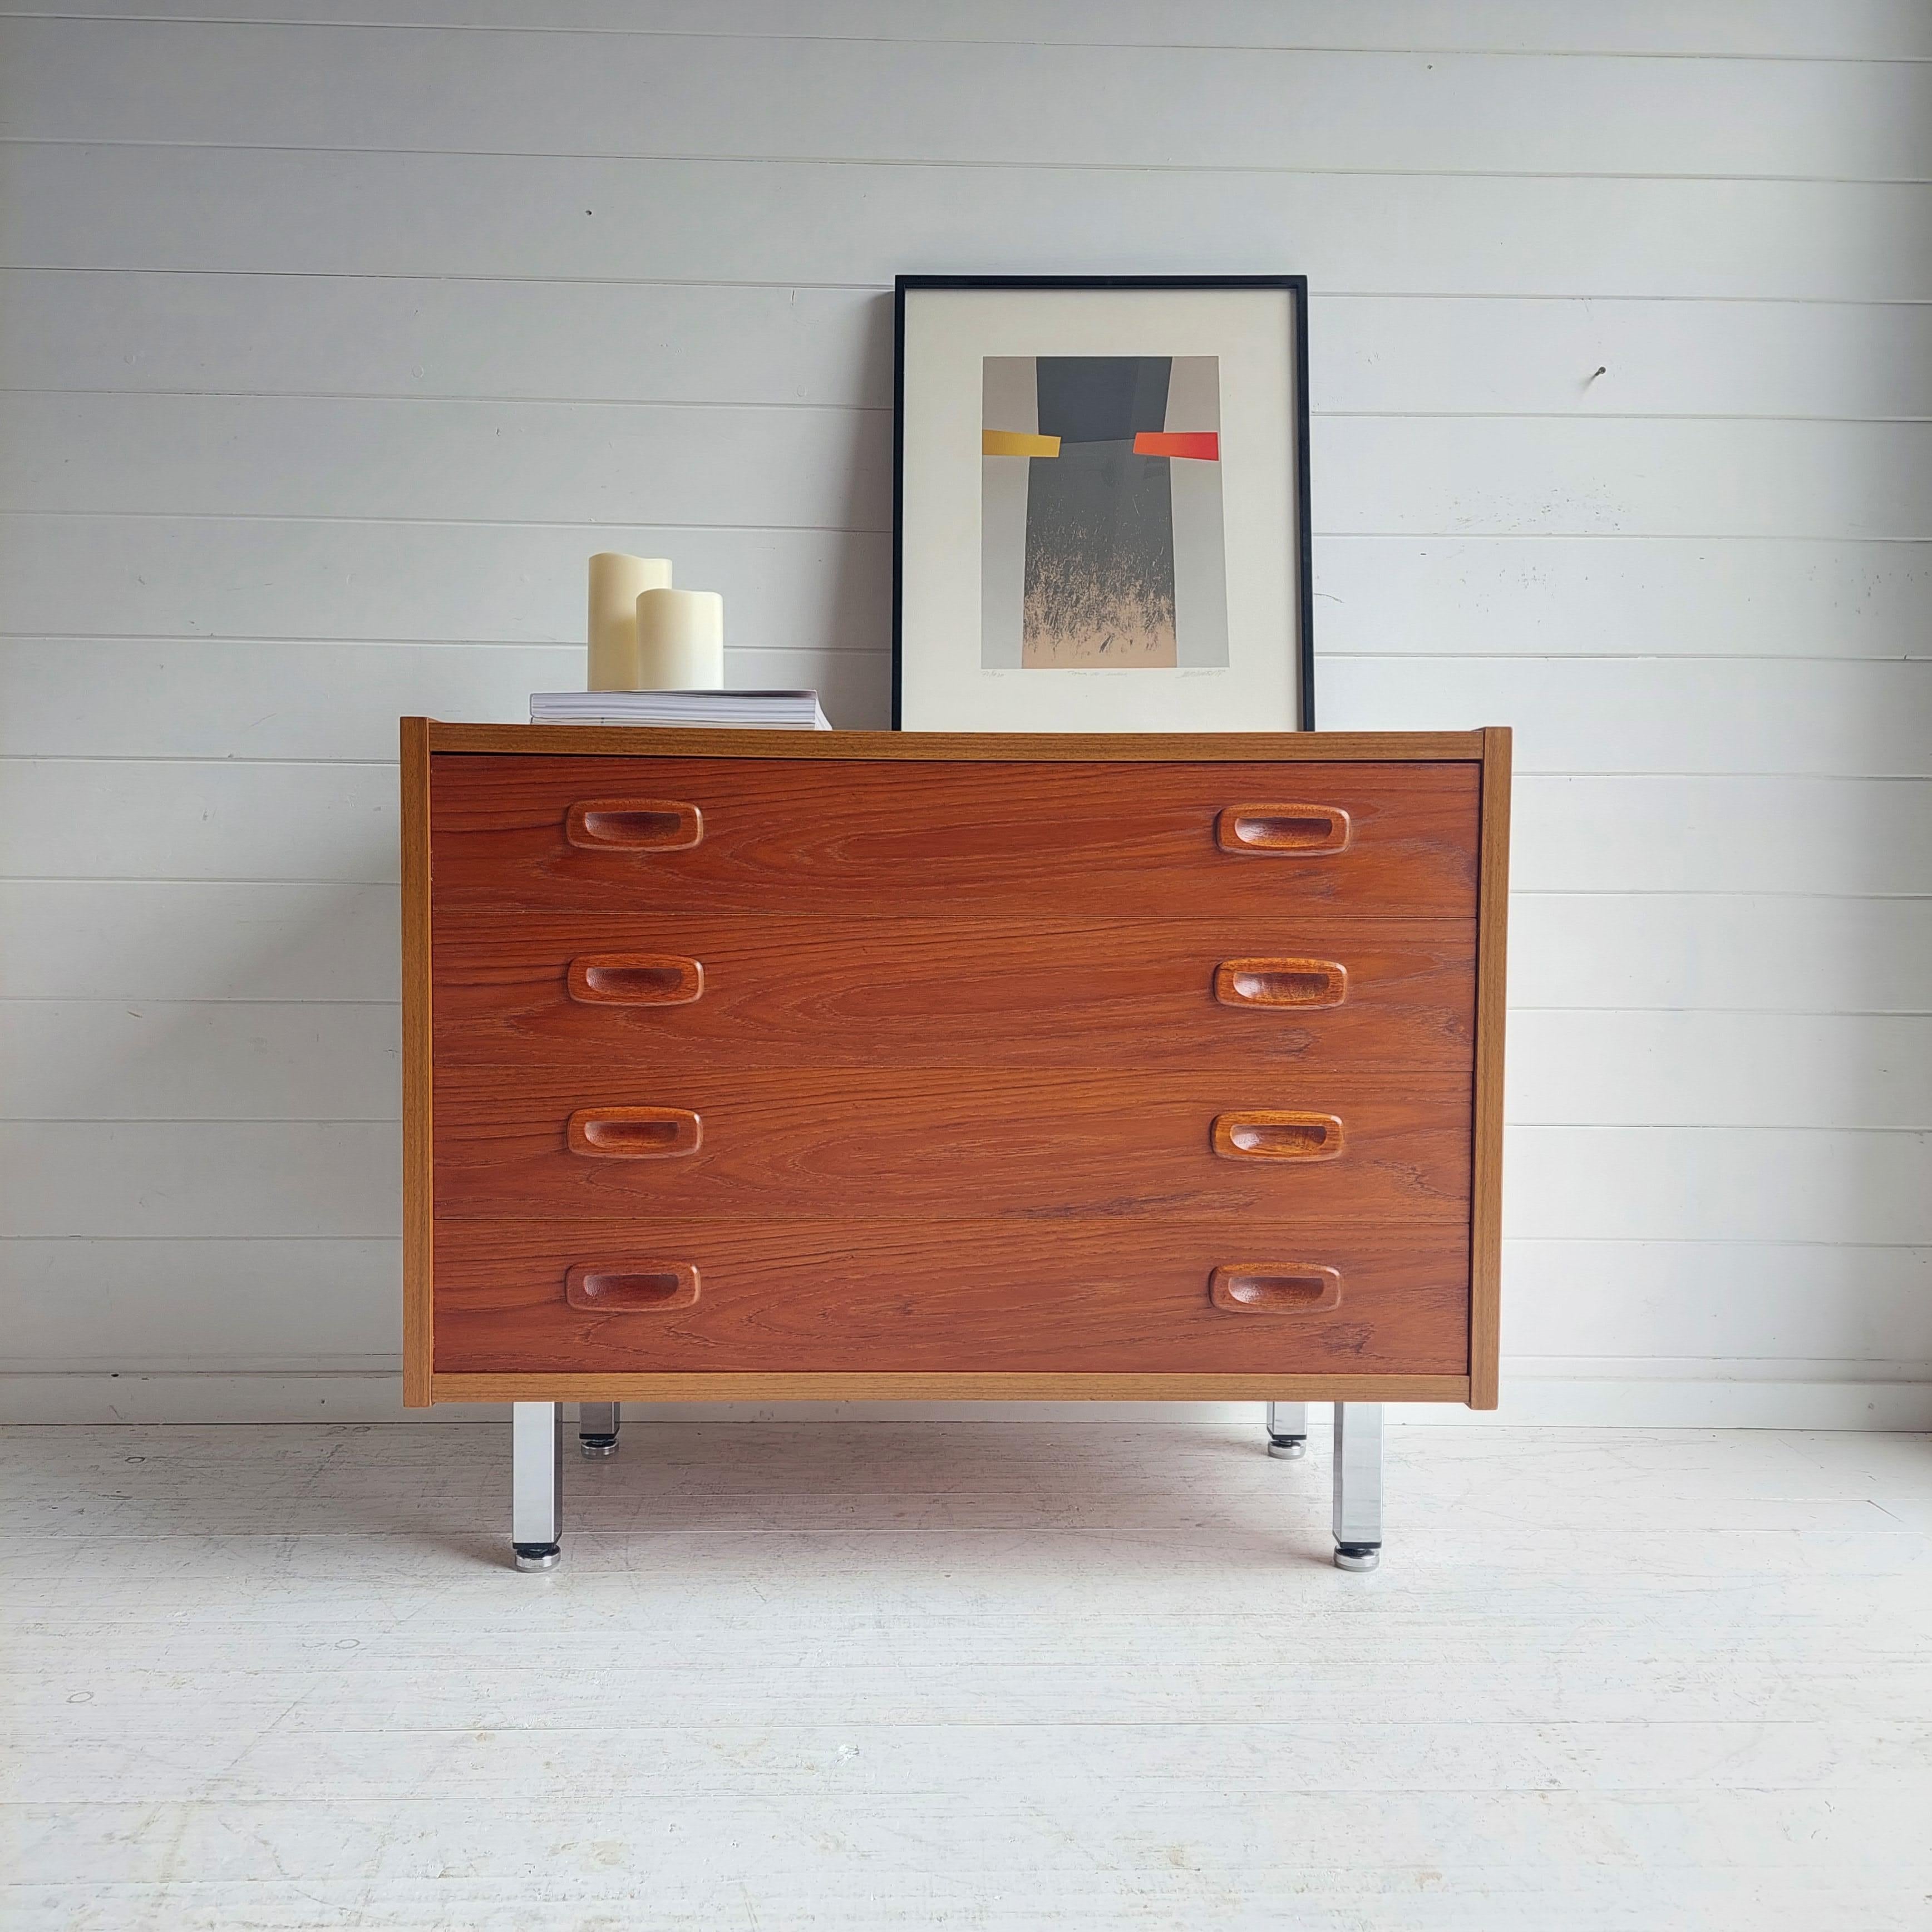 An elegant and classic Danish chest of drawers from the 1960s.
Beautifully raised on chrome legs.
The chest features 4 opening drawers with moulded and drawer pulls.
The piece has a stunning and lovely warm Teak grain.

Classic and versatil design